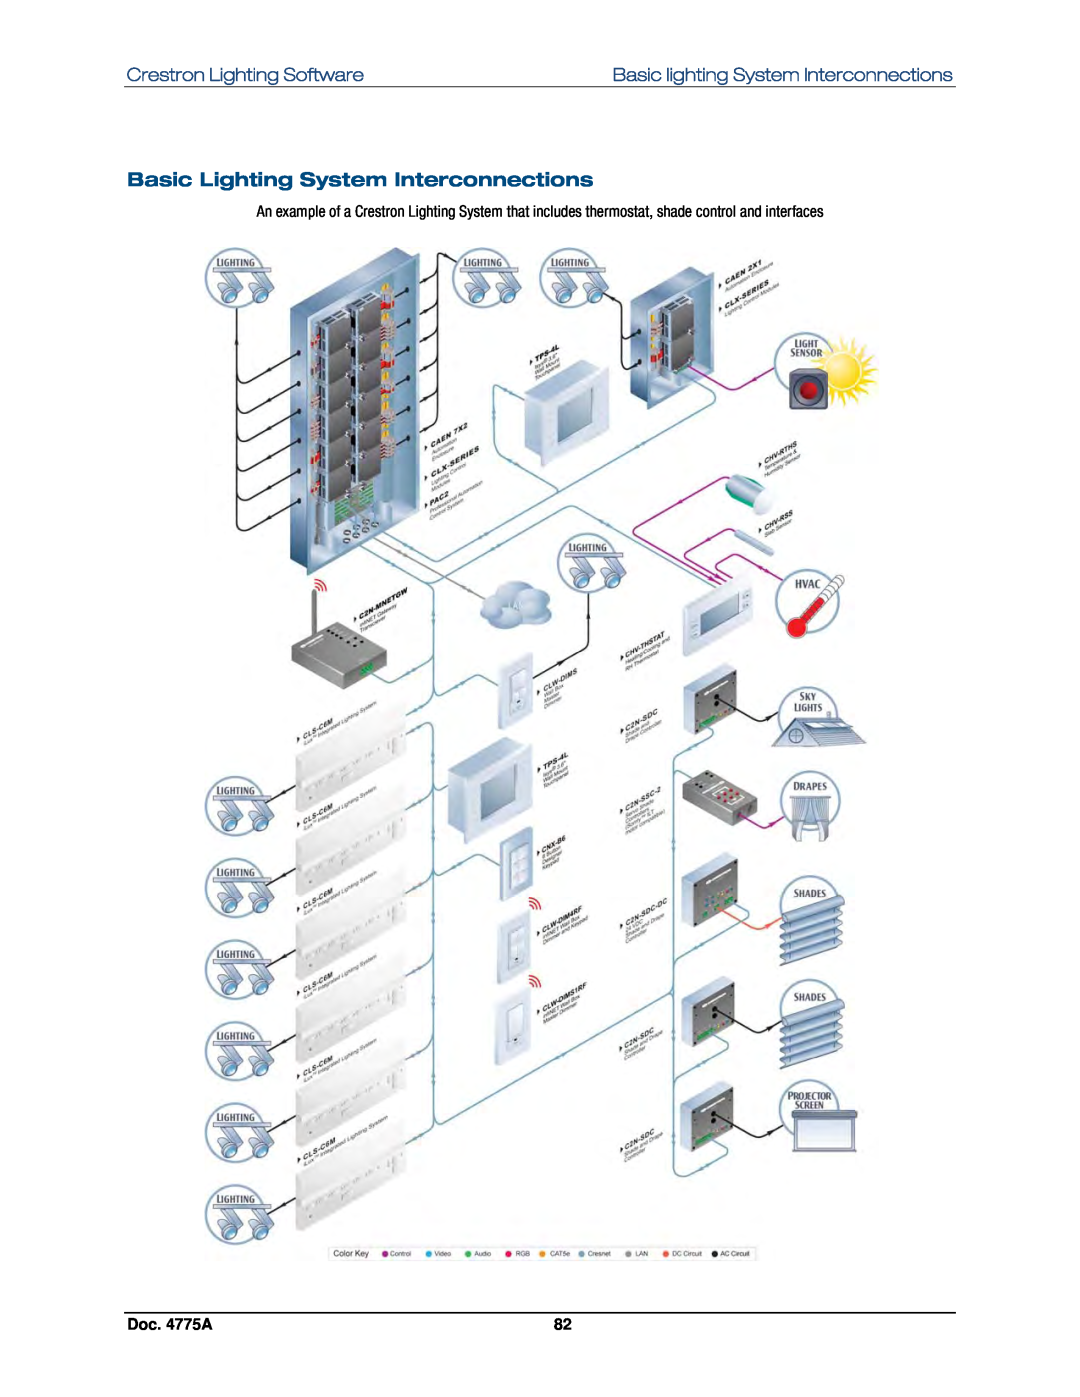 Crestron electronic GLPS-SW-FT, IPAC-GL1 Basic Lighting System Interconnections, Crestron Lighting Software, Doc. 4775A 